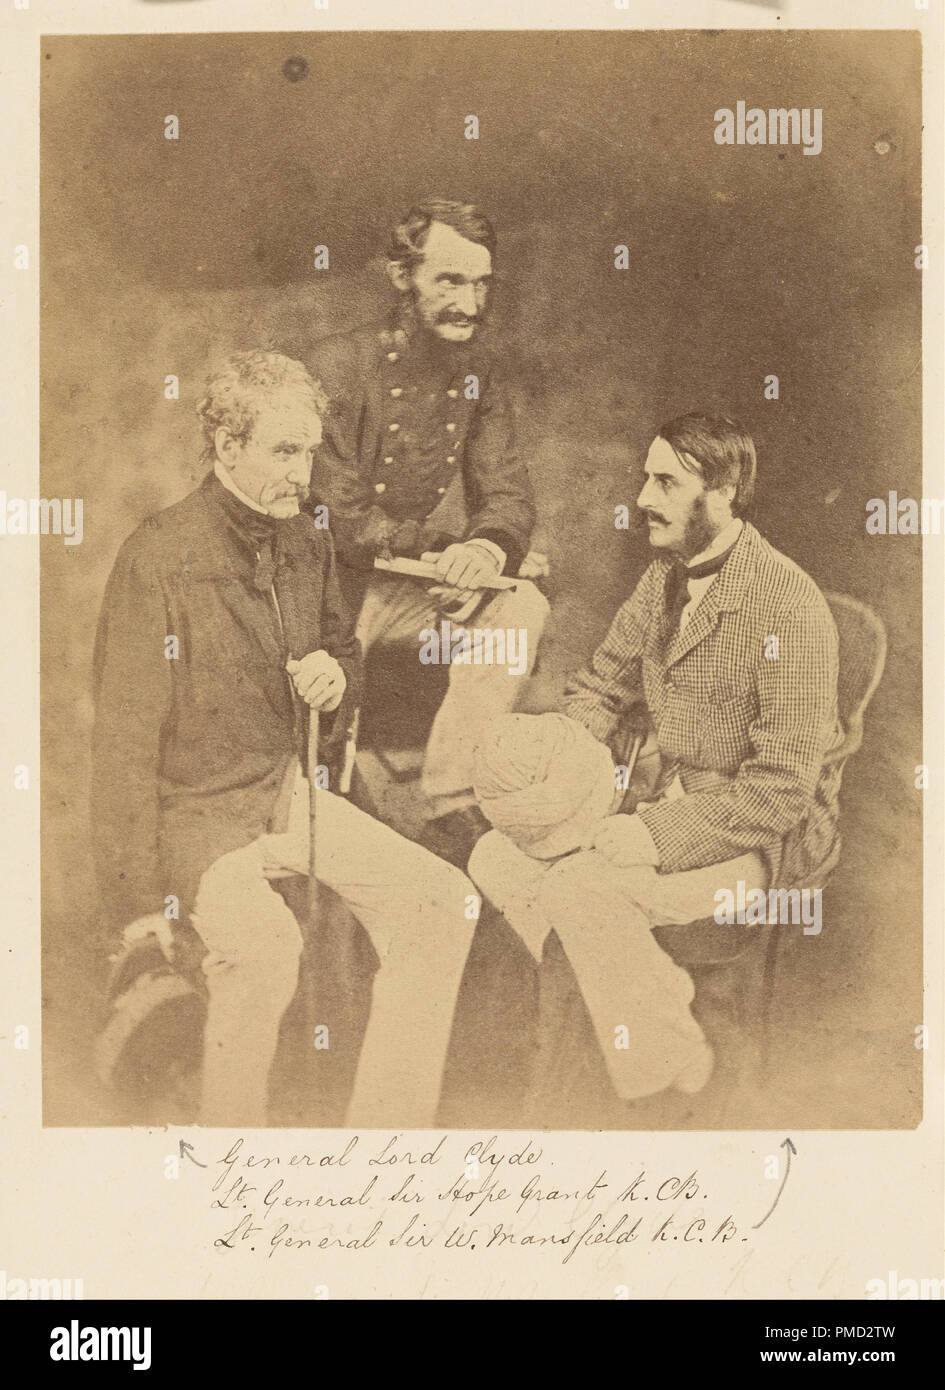 [Generale Lord Clyde, Lieutenant-General Sir speranza concedere, K.C.B. e Lieutenant-General Sir W. Mansfield, K.C.B.]. Data/Periodo: 1858 - 1859. Stampa. Albume d'argento. Altezza: 175 mm (6.88 in); larghezza: 141 mm (5,55 in). Autore: Felice Beato. Foto Stock